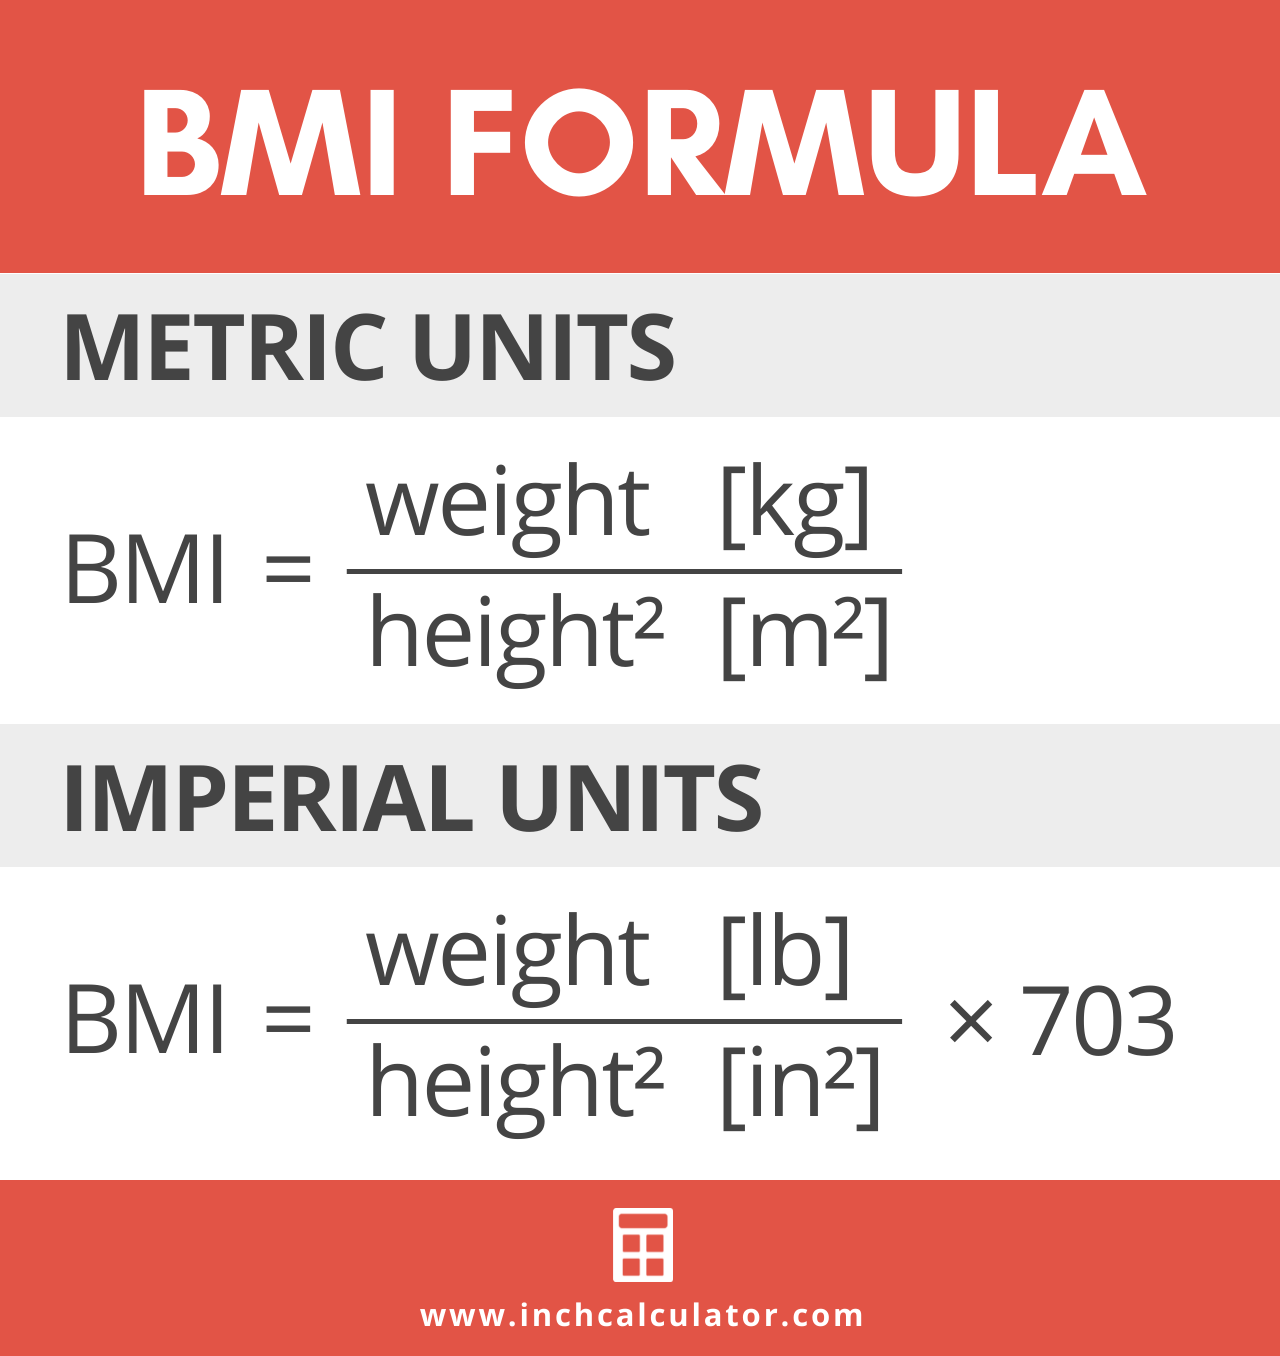 bmi calculator for women who lift weights